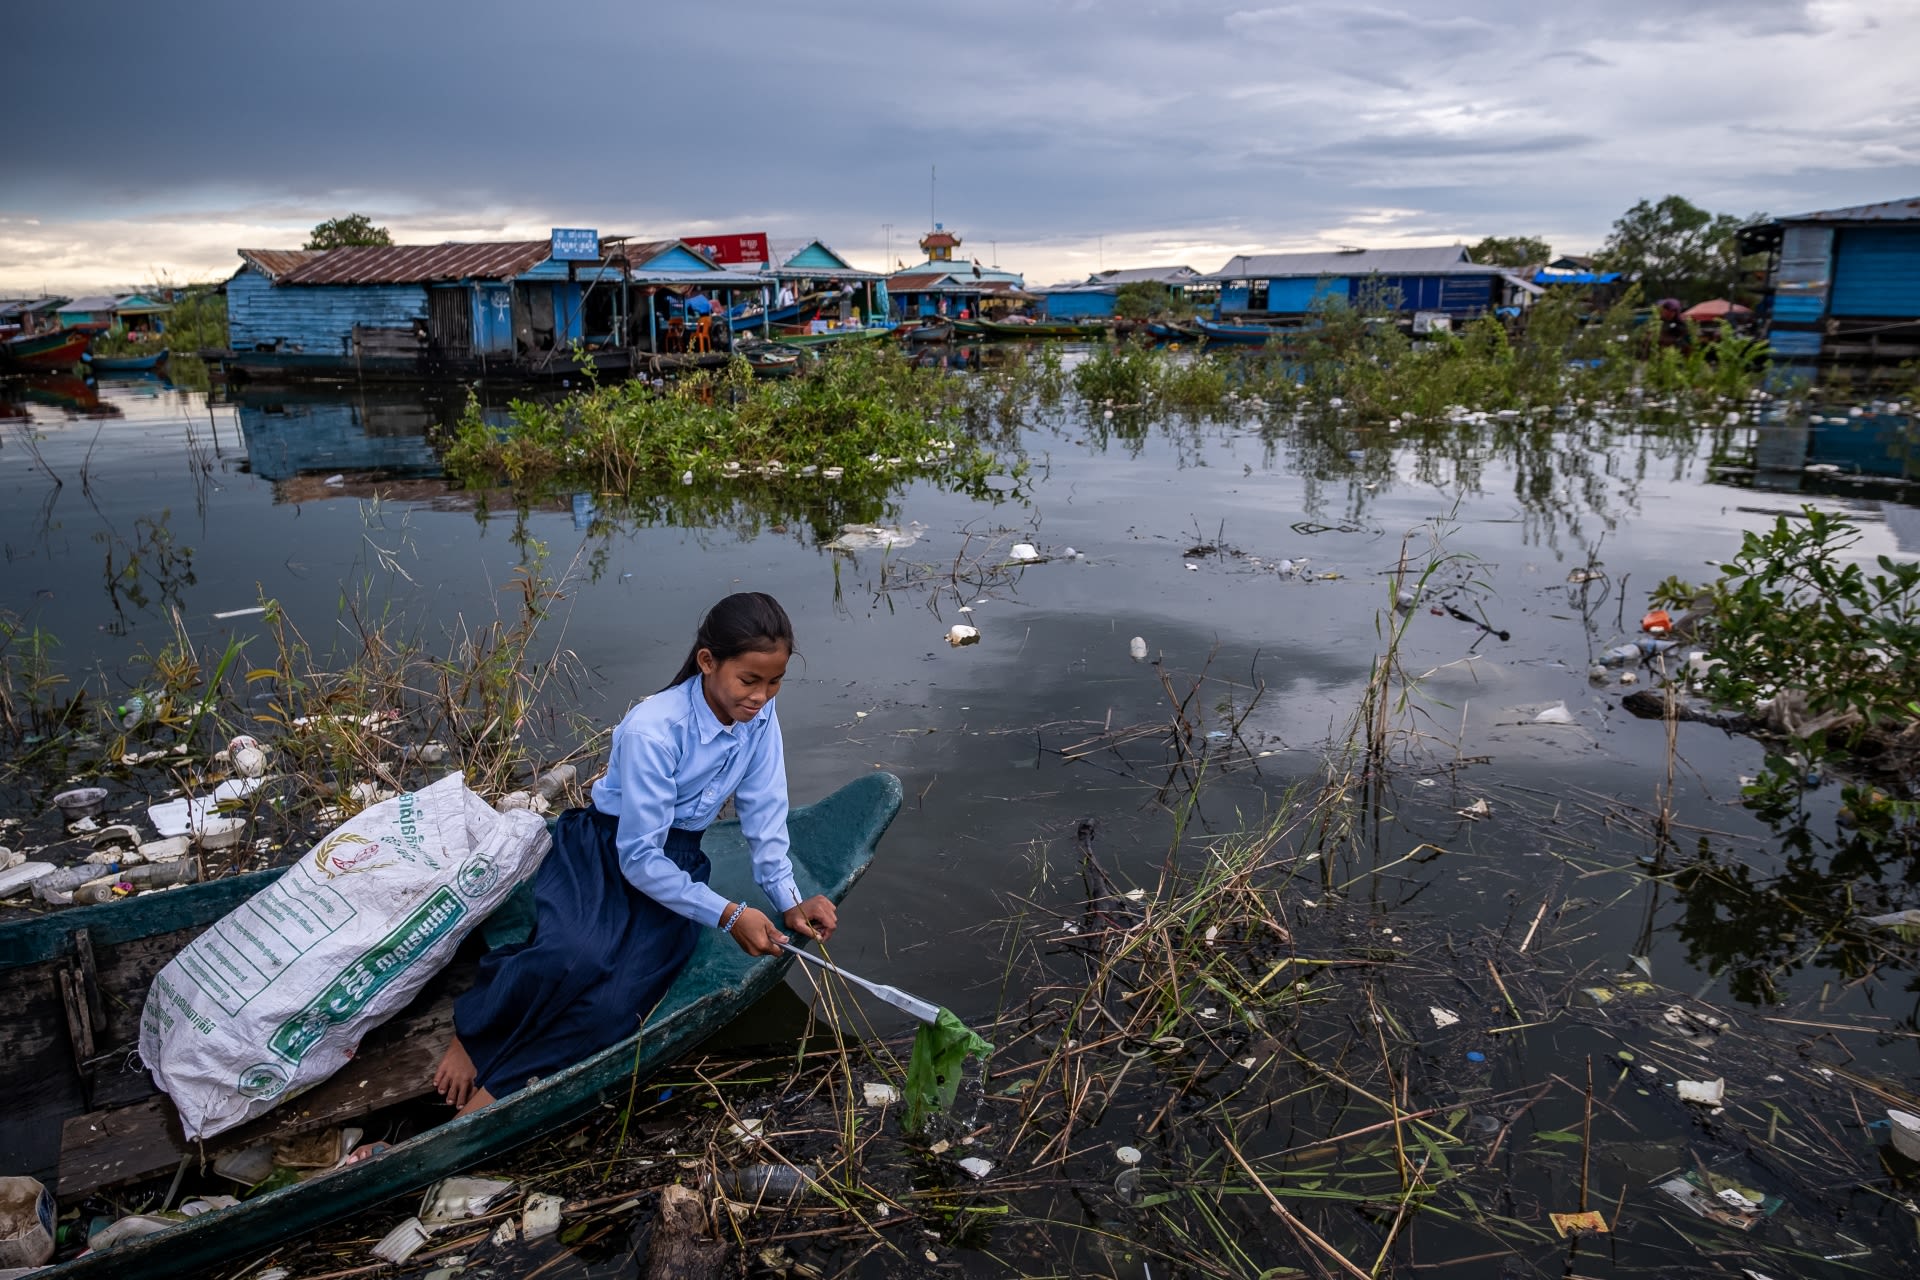 Ratana, 12, leans out of her boat to collect rubbish from Tonle Sap Lake, Cambodia.